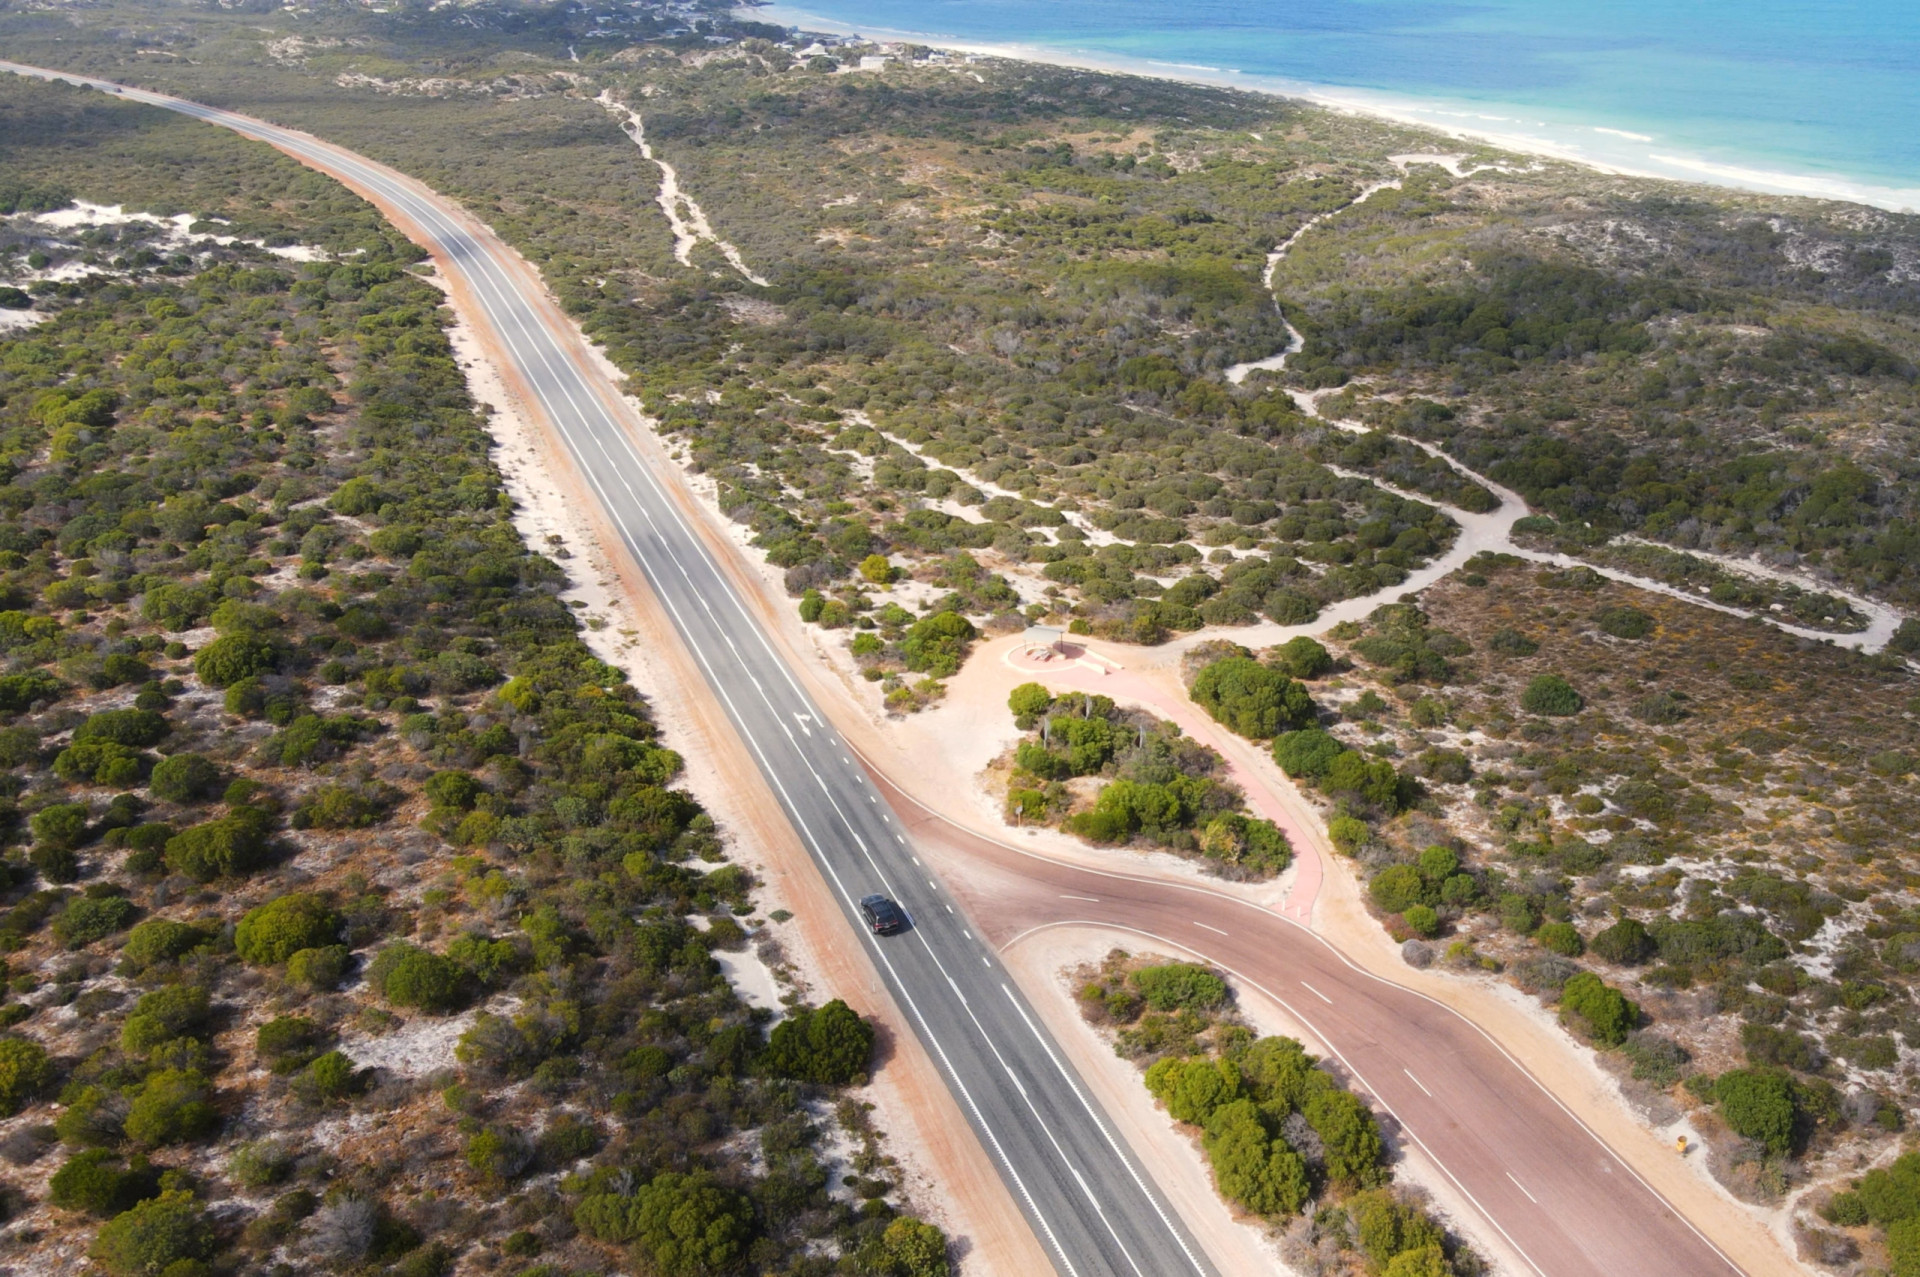 <p>Meanwhile, Australia's Highway 1 can claim the title of longest continuing highway in the world (the Pan-American Highway is separated by the Darién Gap). Highway 1 has a total length of approximately 9,000 miles (14,500 km).</p>